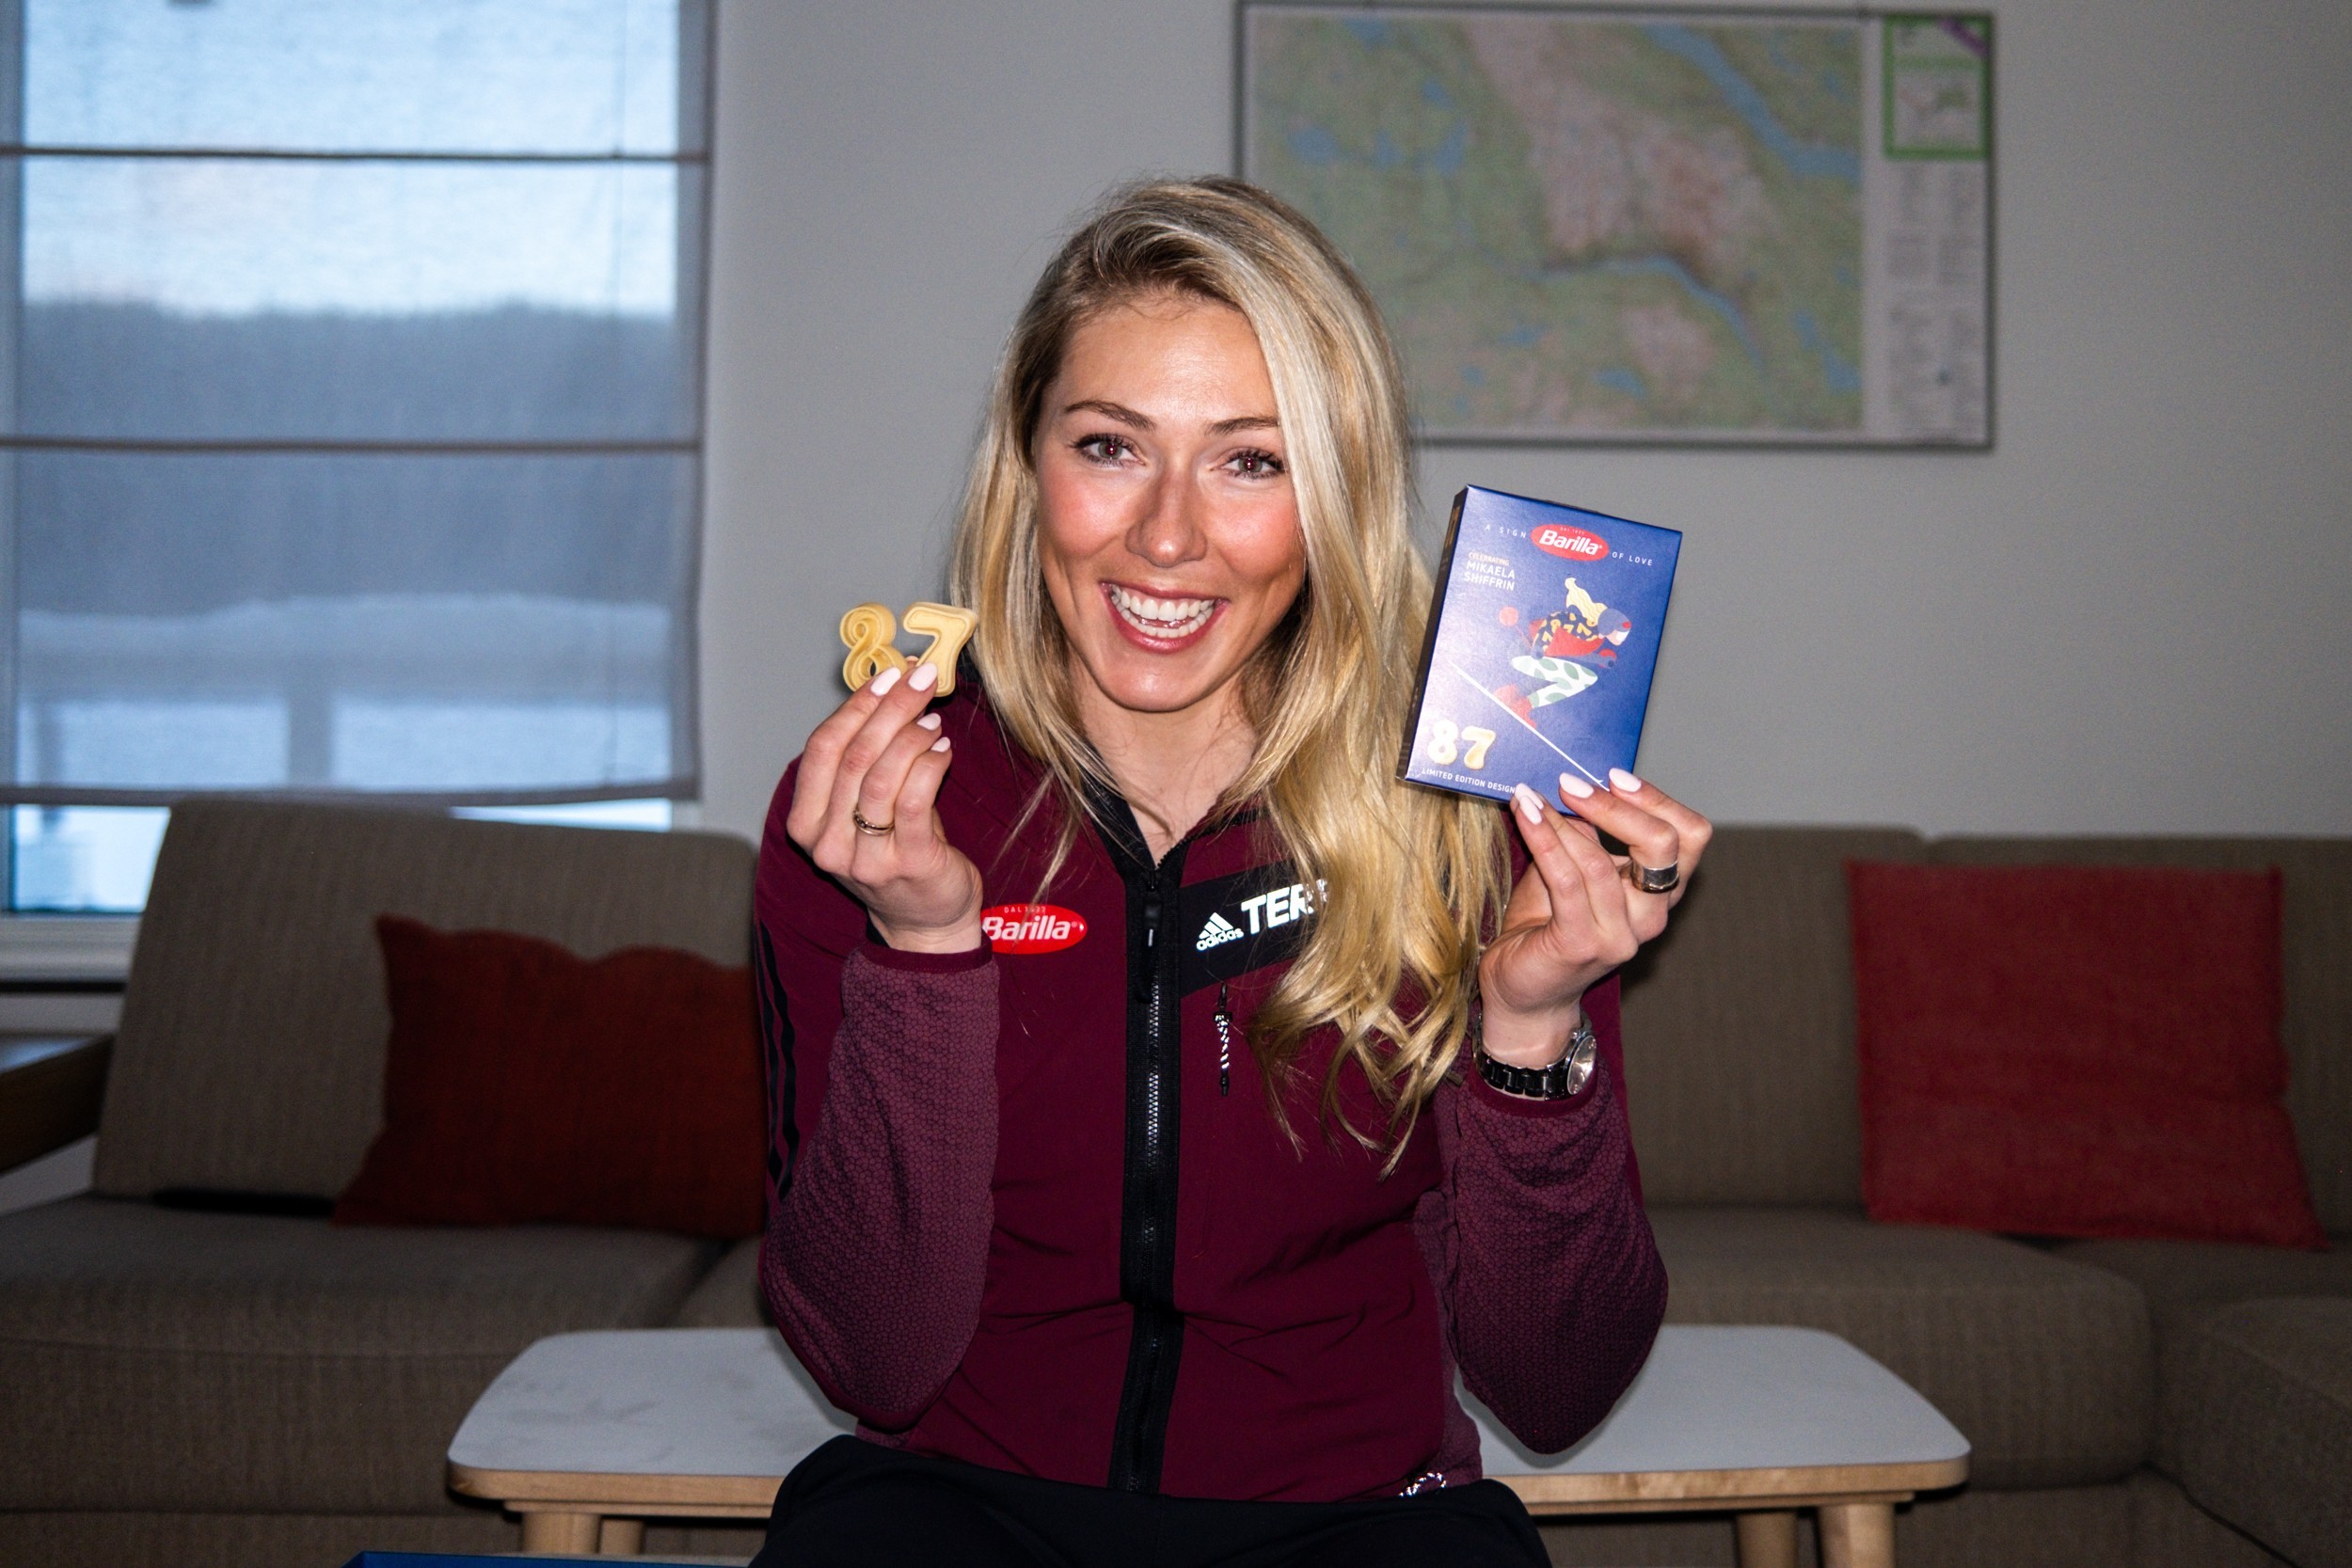 Barilla & Mikaela Shiffrin: Greatness starts with a great recipe - Pack No. 32